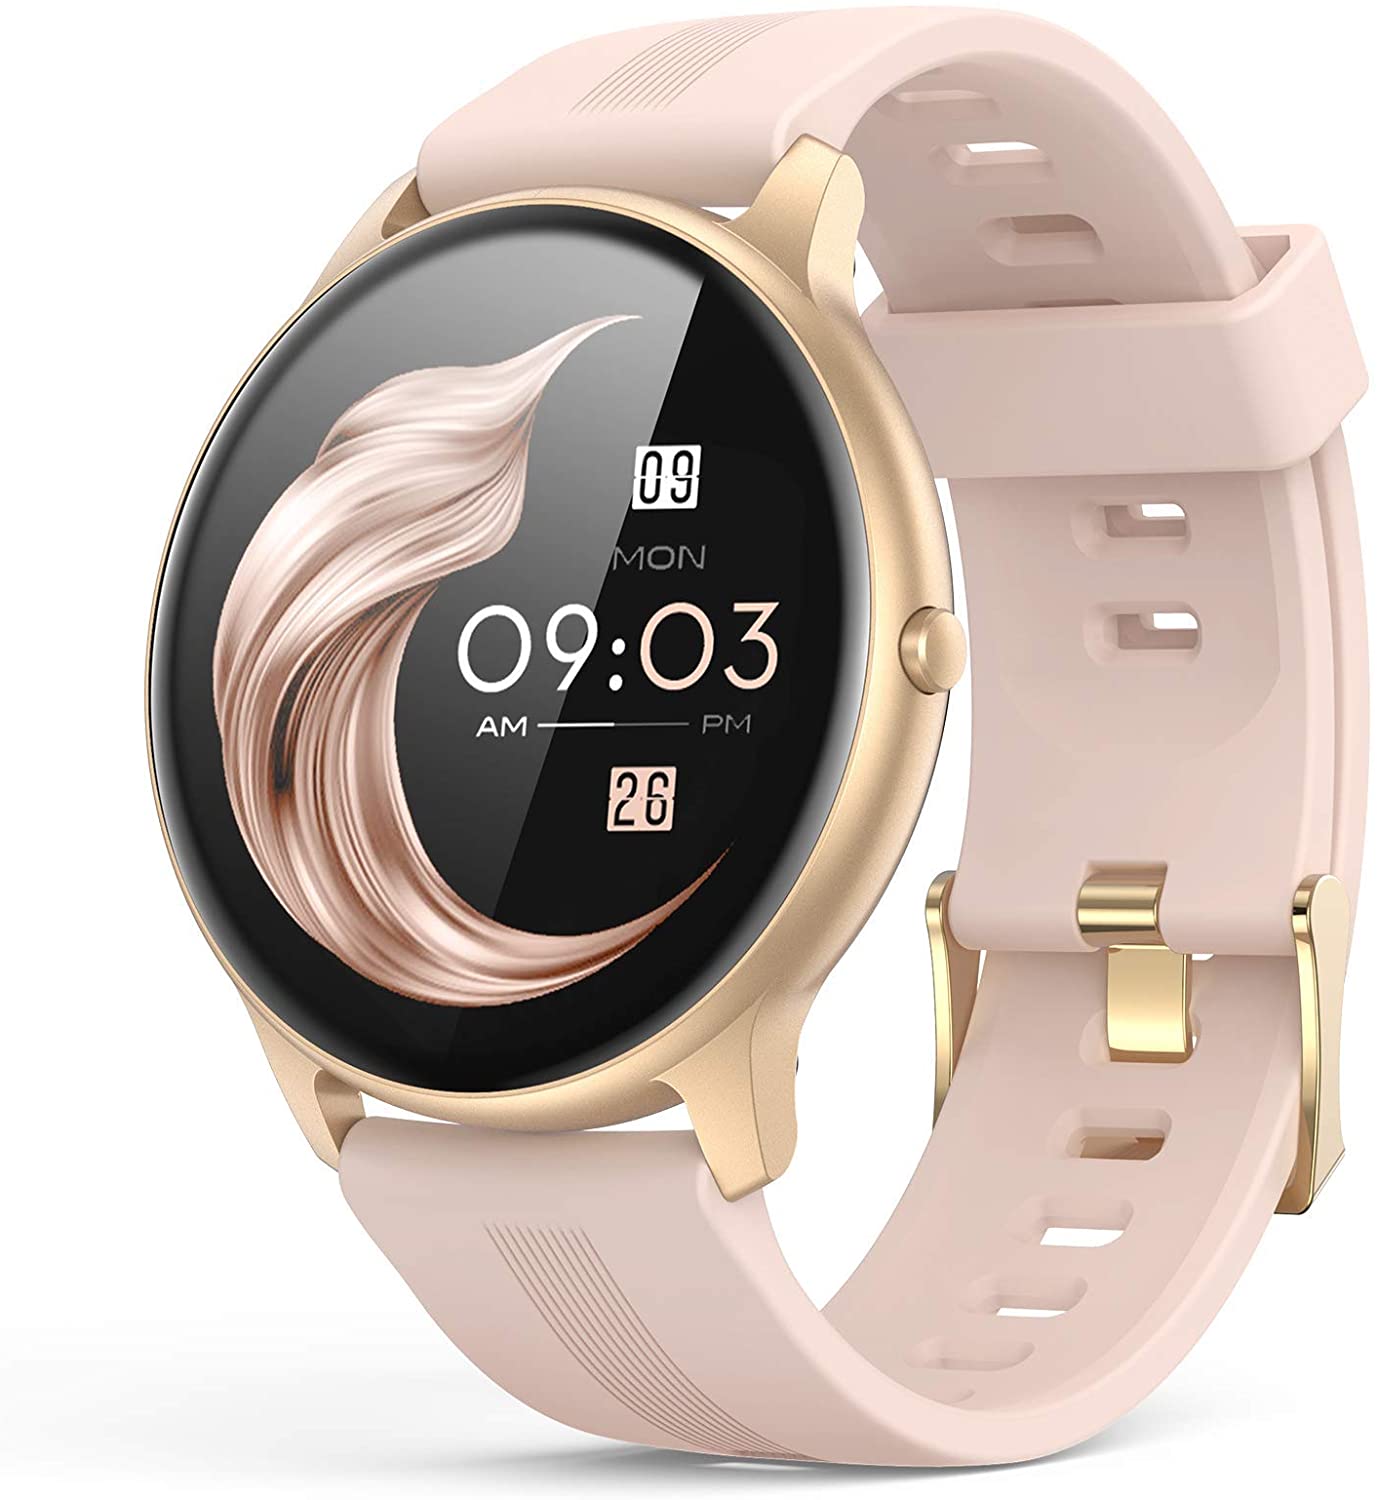 Detail Images Of Smart Watches Nomer 24